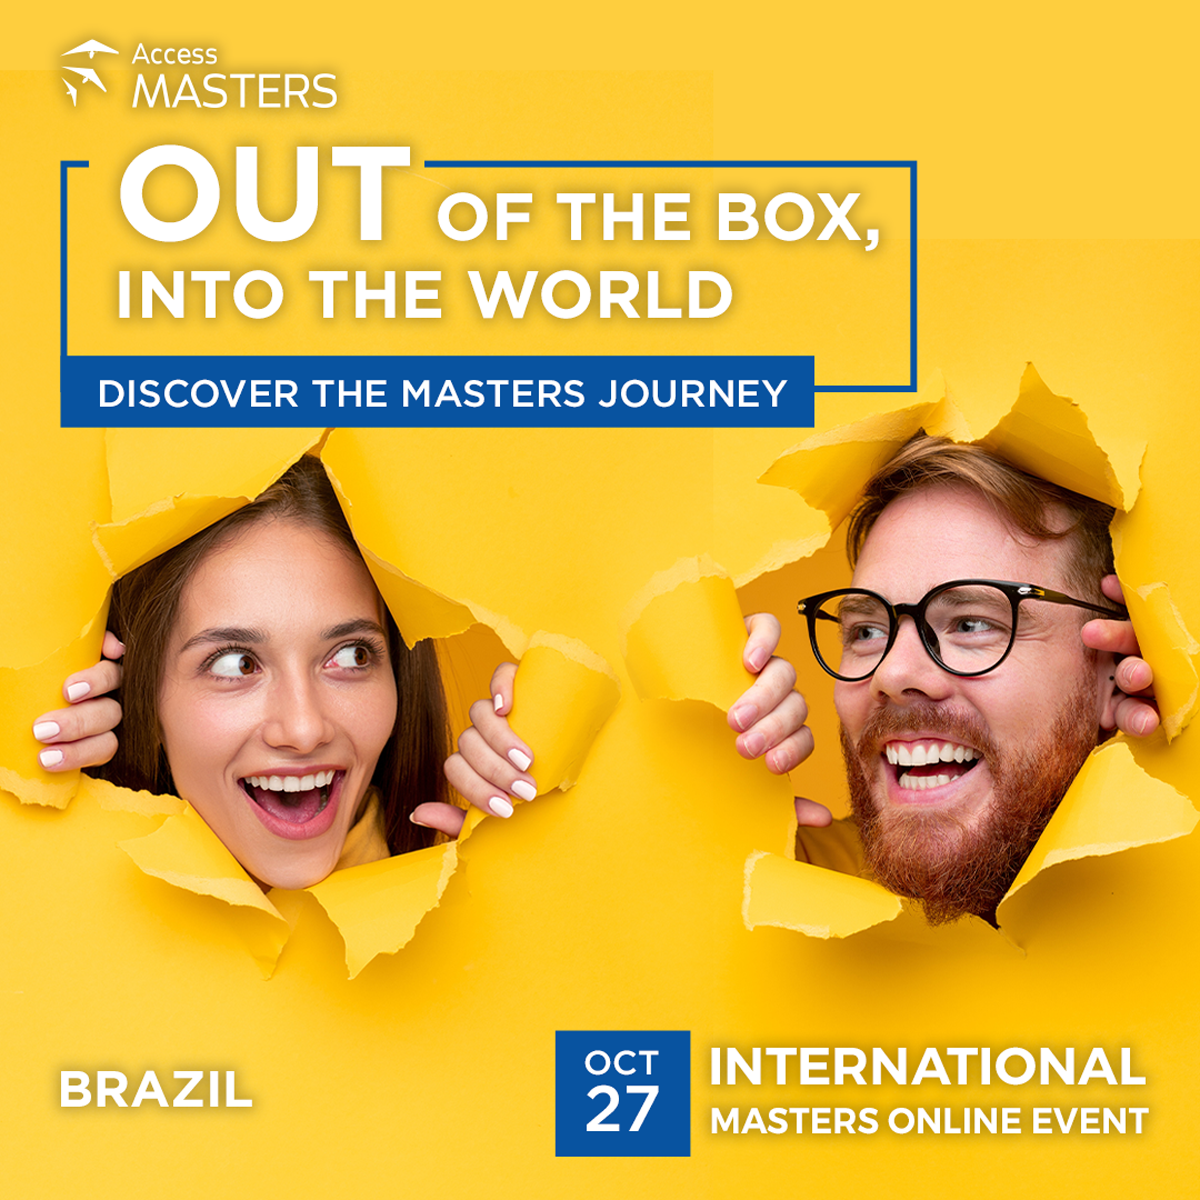 Masters Online Event for residents of Brazil, Online Event